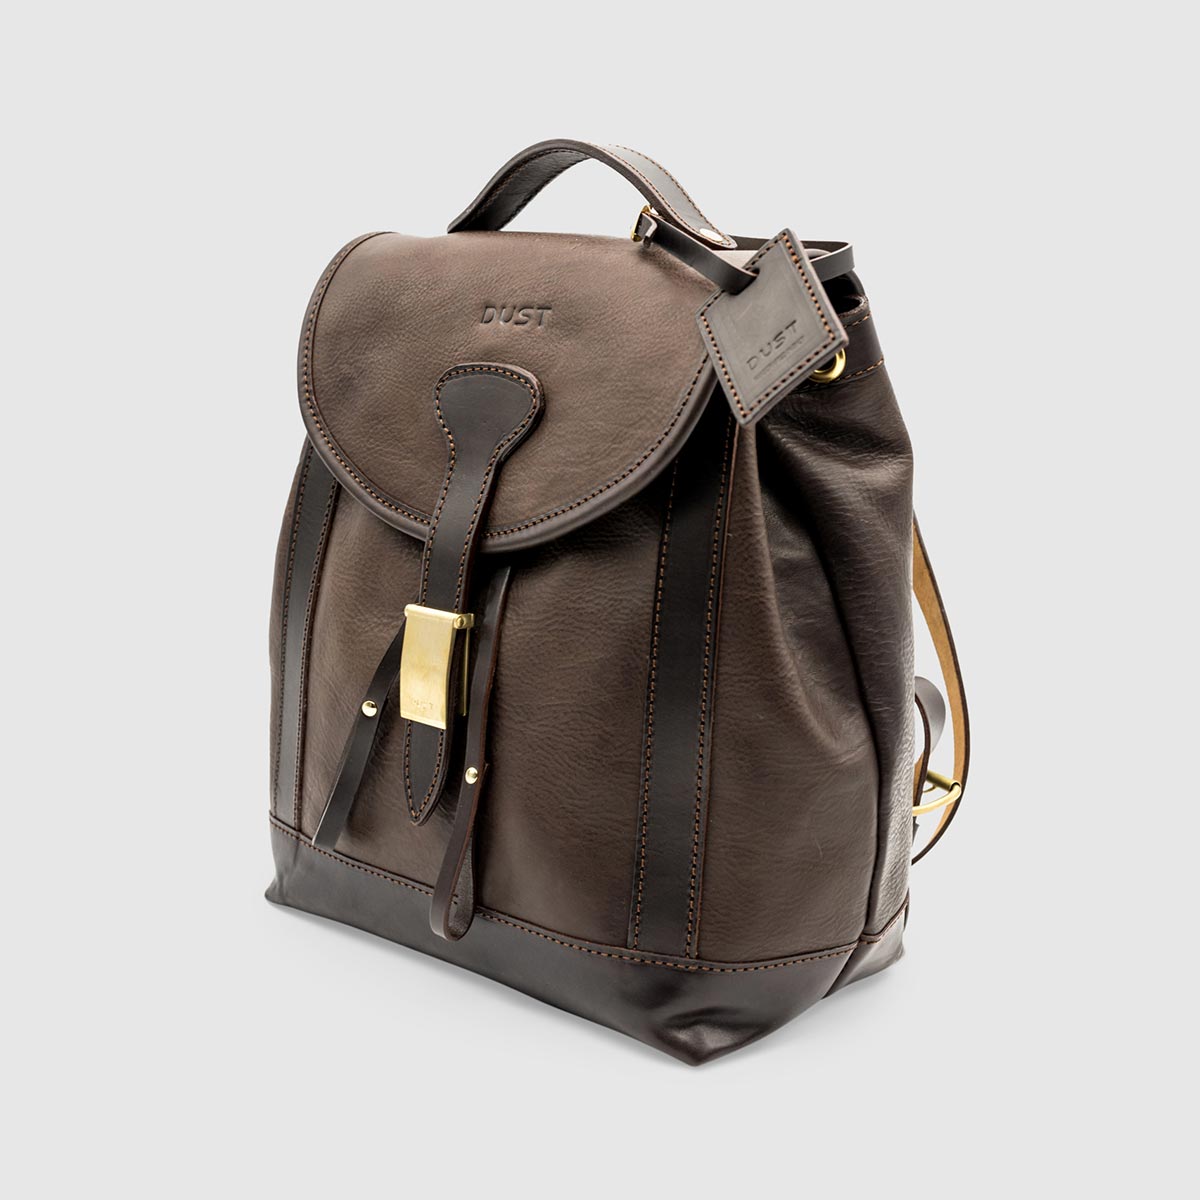 Vegetable Tumbled Leather Backpack  – Dark Brown Leather The Dust on sale 2022 2